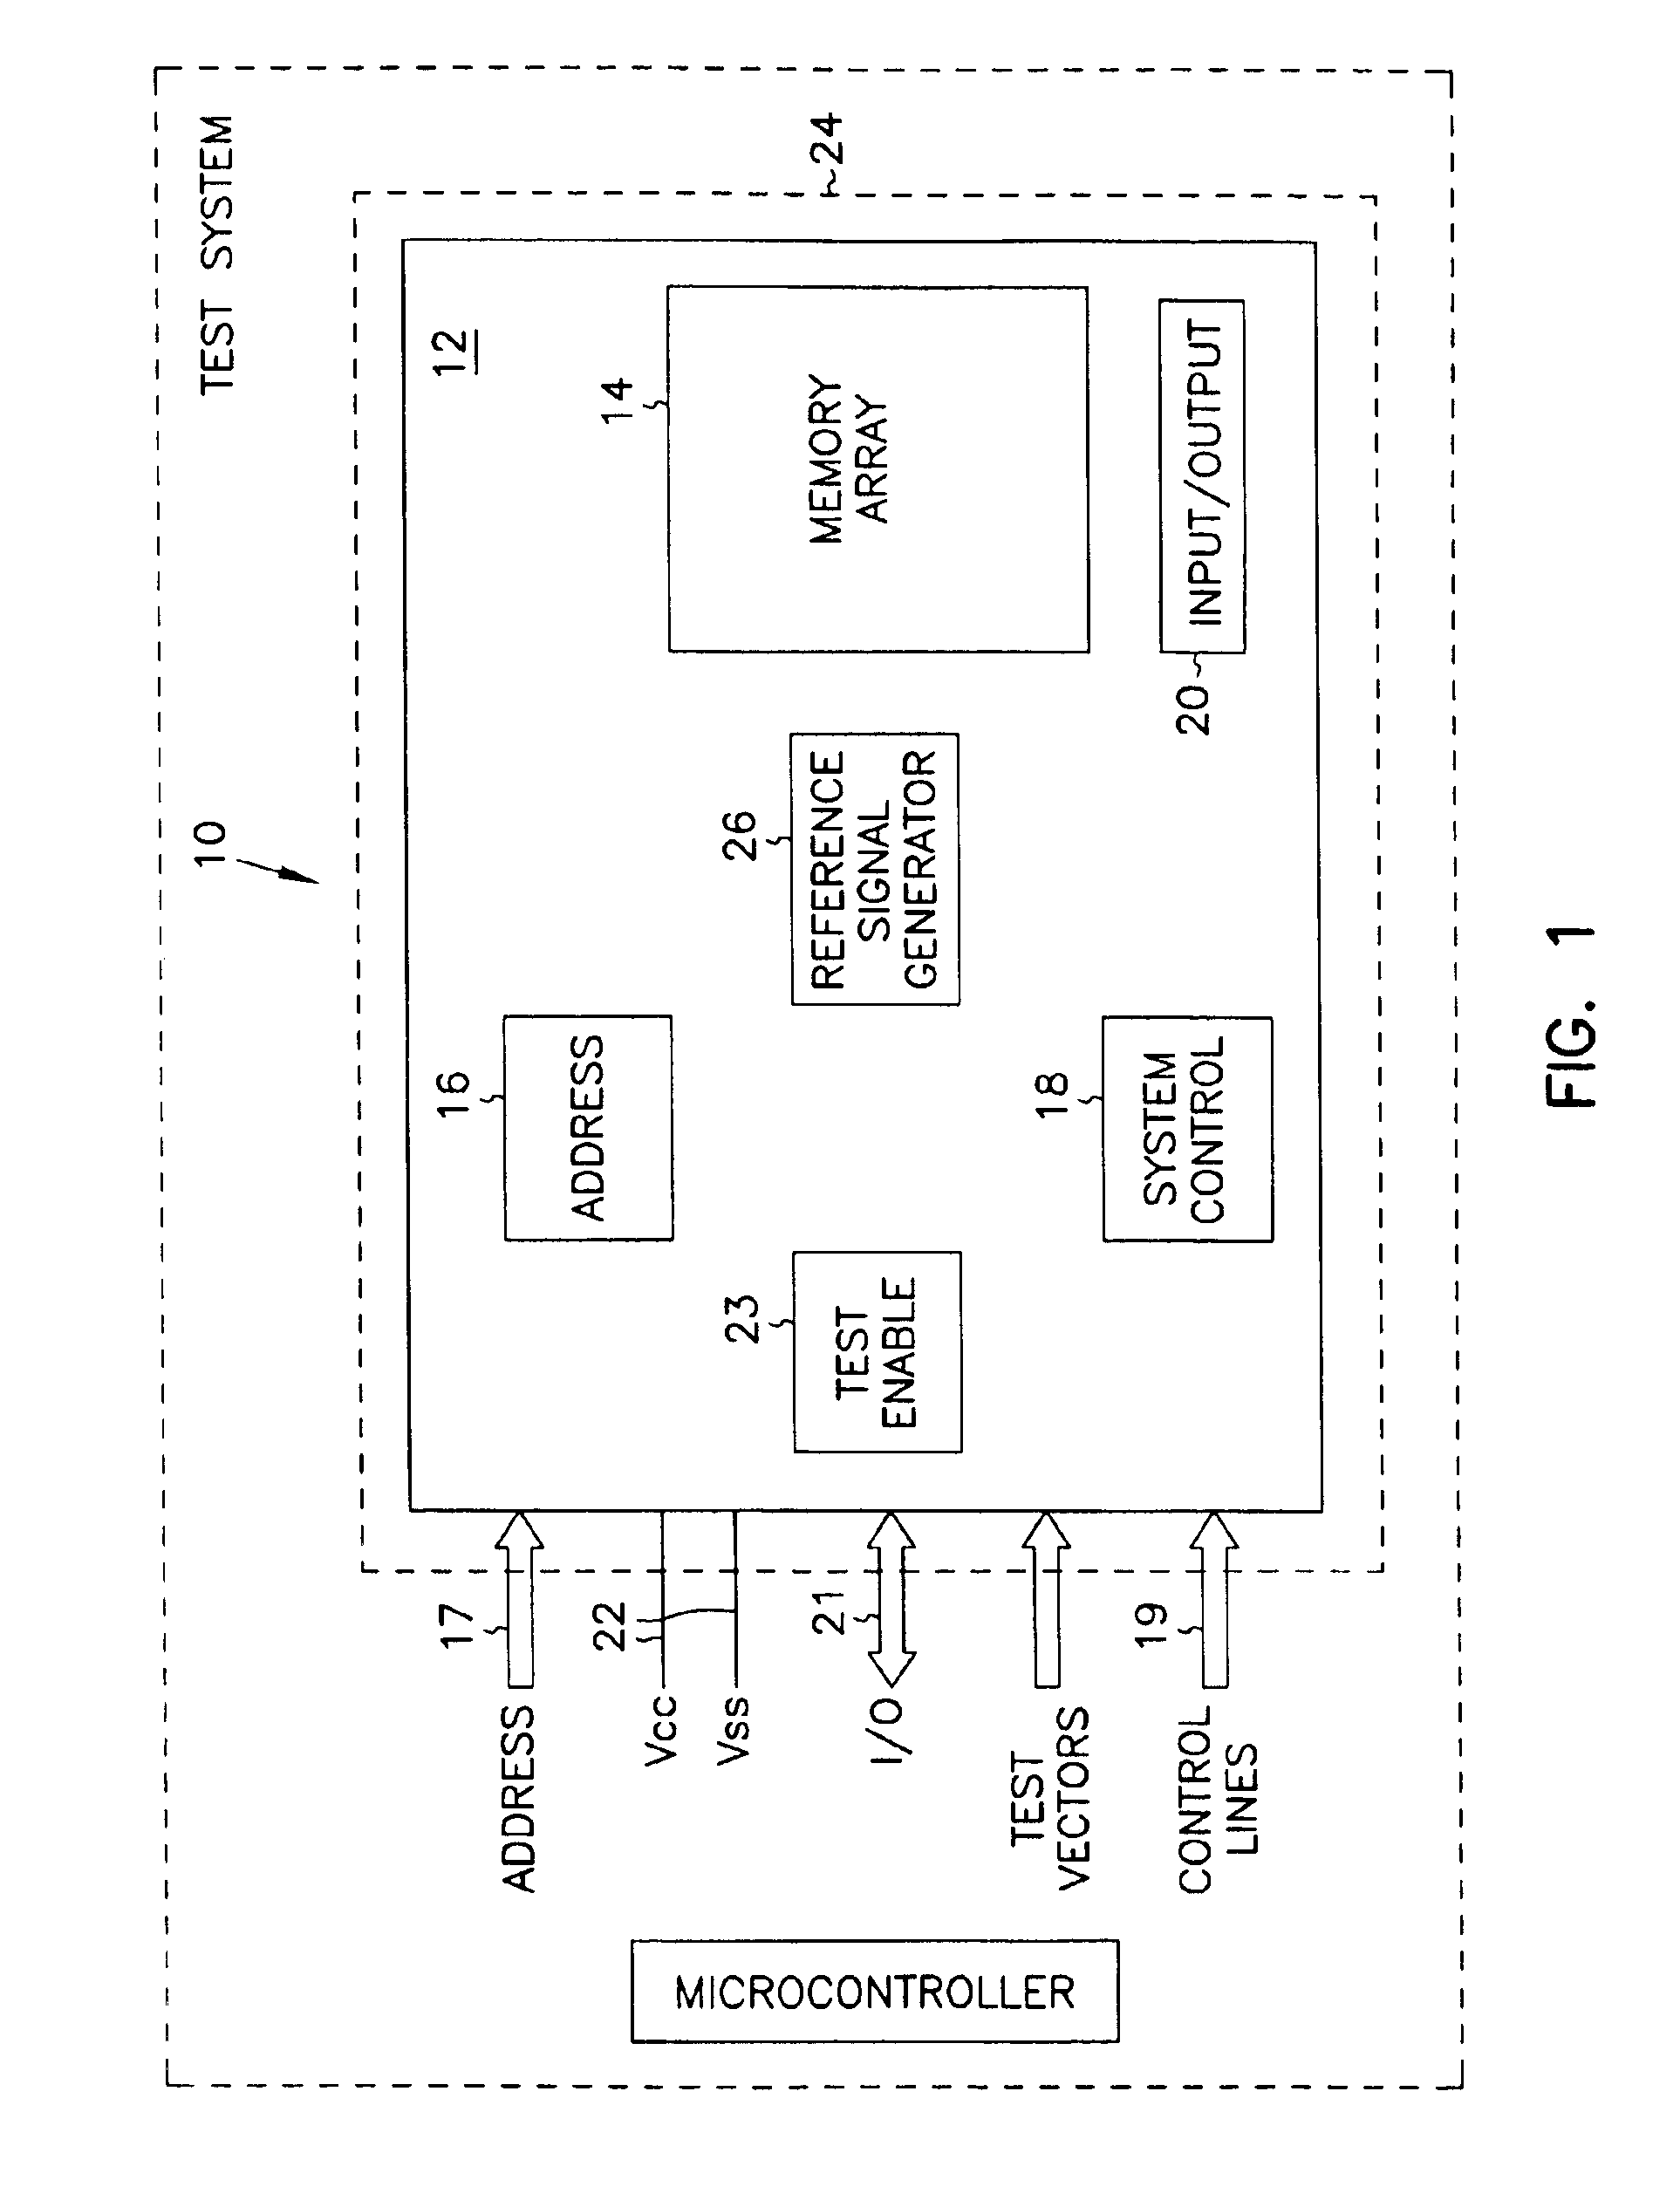 System for testing integrated circuit devices